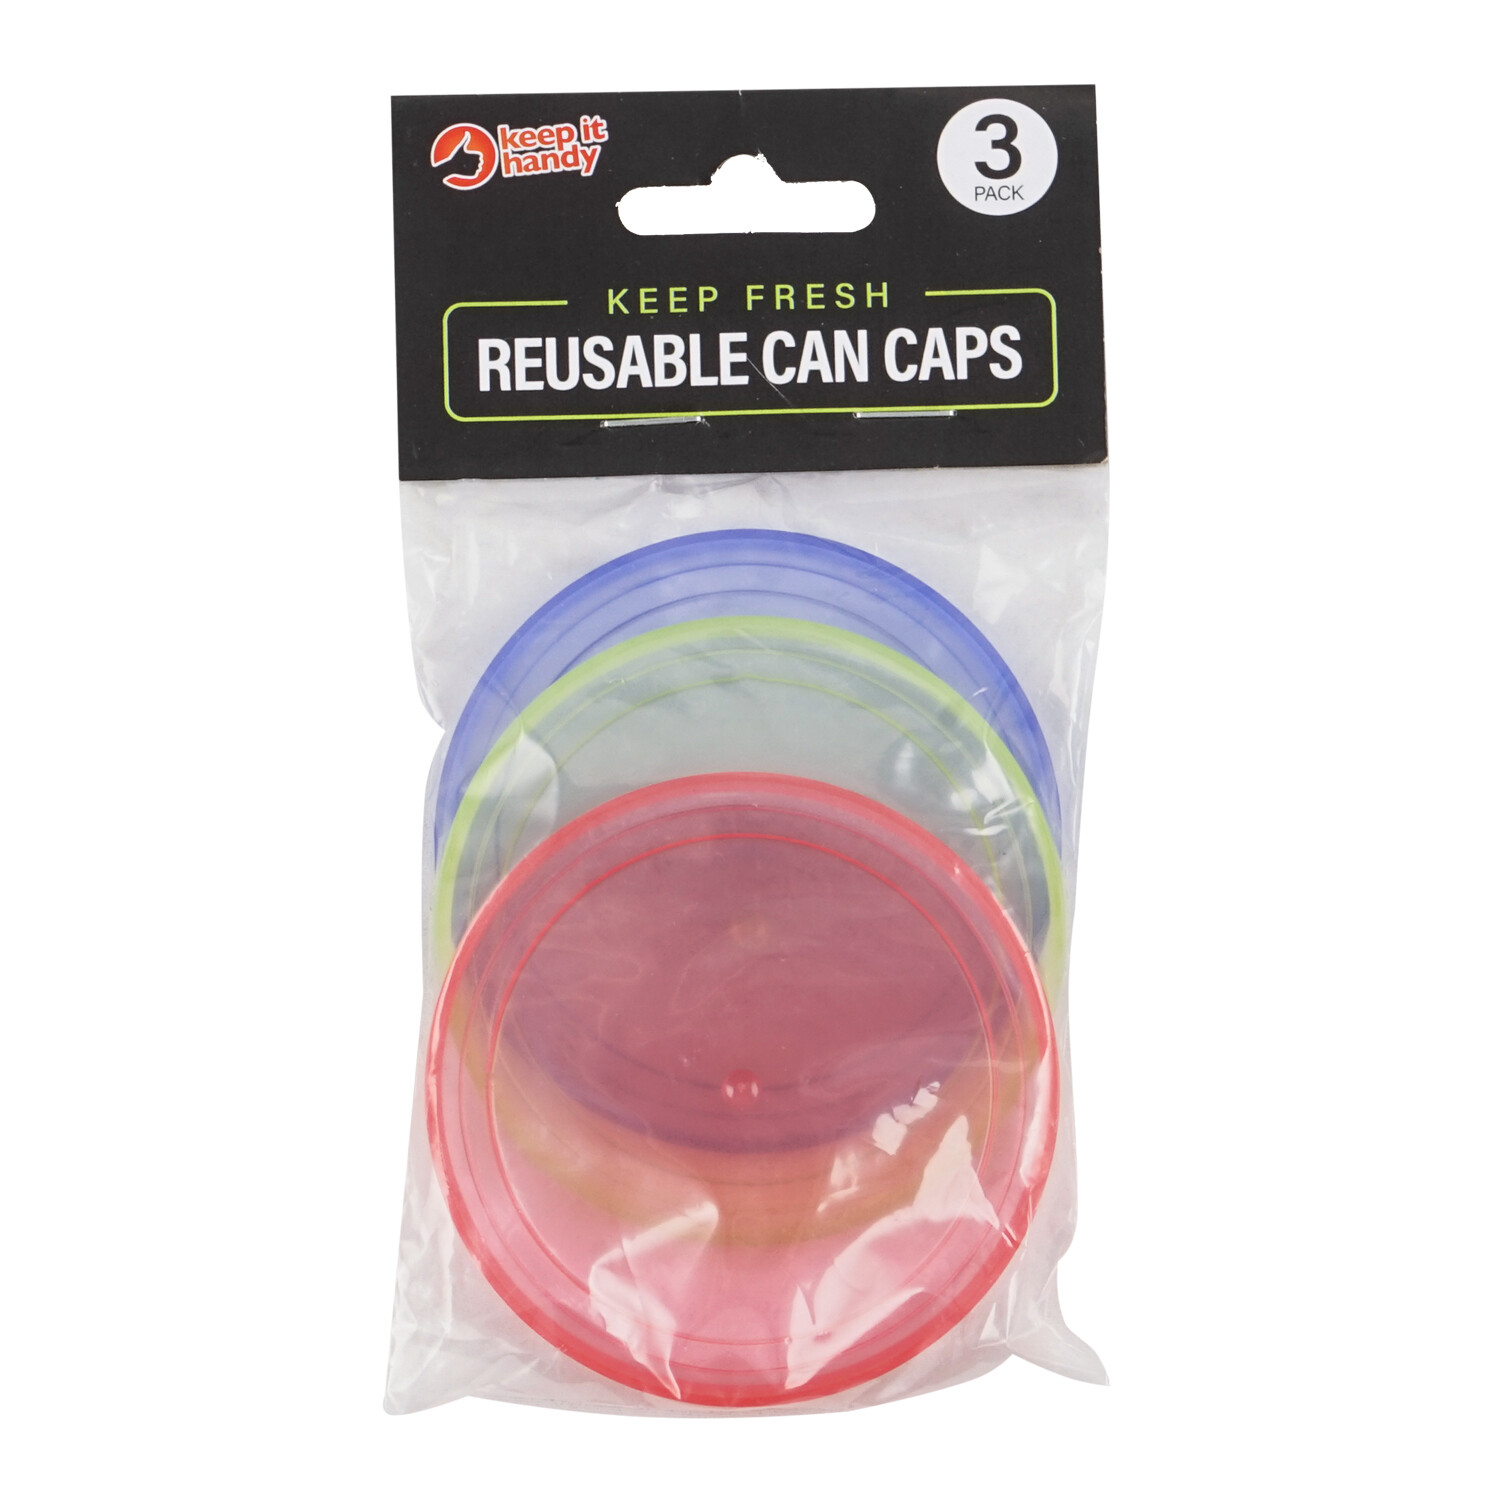 Pack of 3 Reusable Can Caps Image